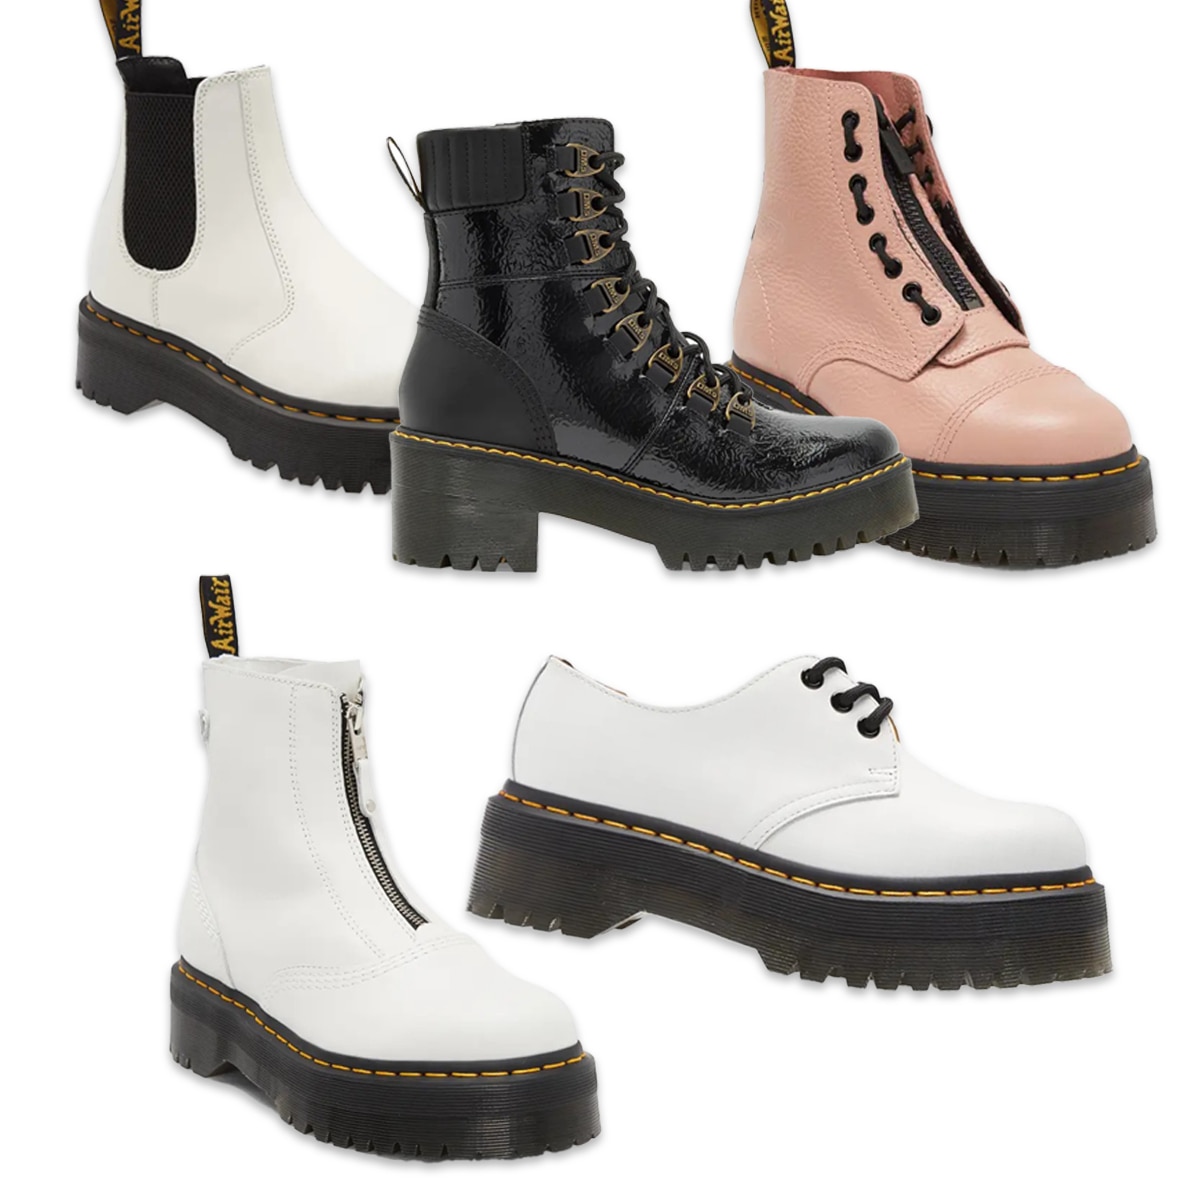 Nordstrom Rack's 60% Off Dr. Martens Flash Sale Is Too Good to Miss